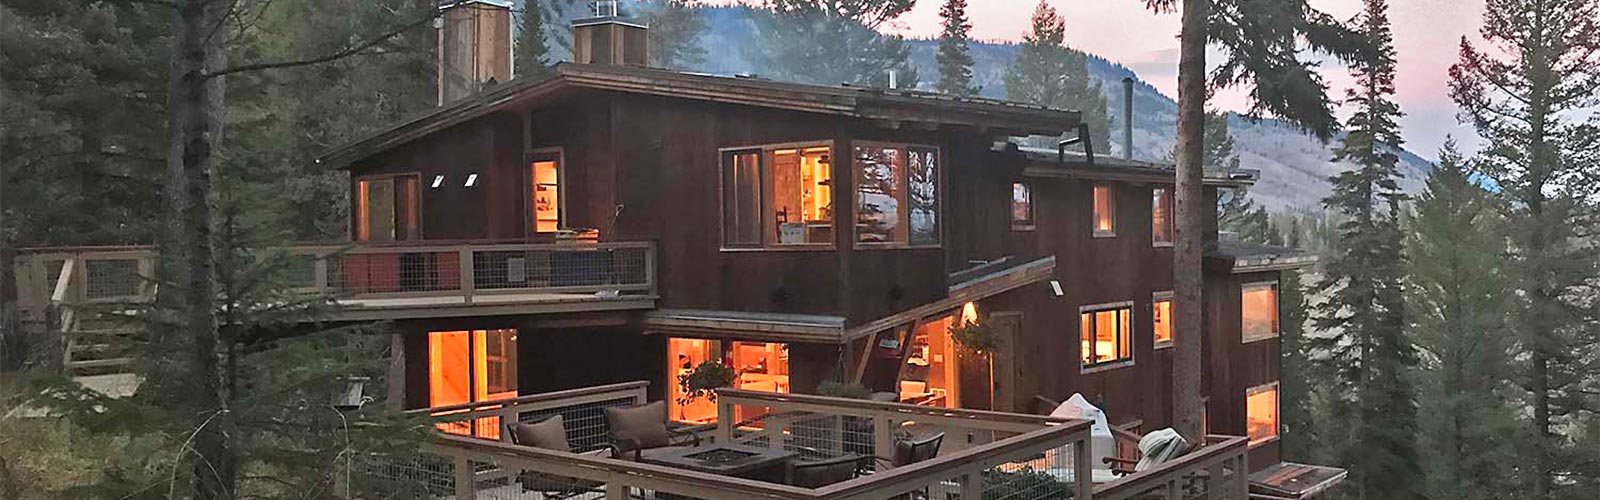 bed-and-breakfast-jackson-hole-lodging-welcome-header - Jackson Hole